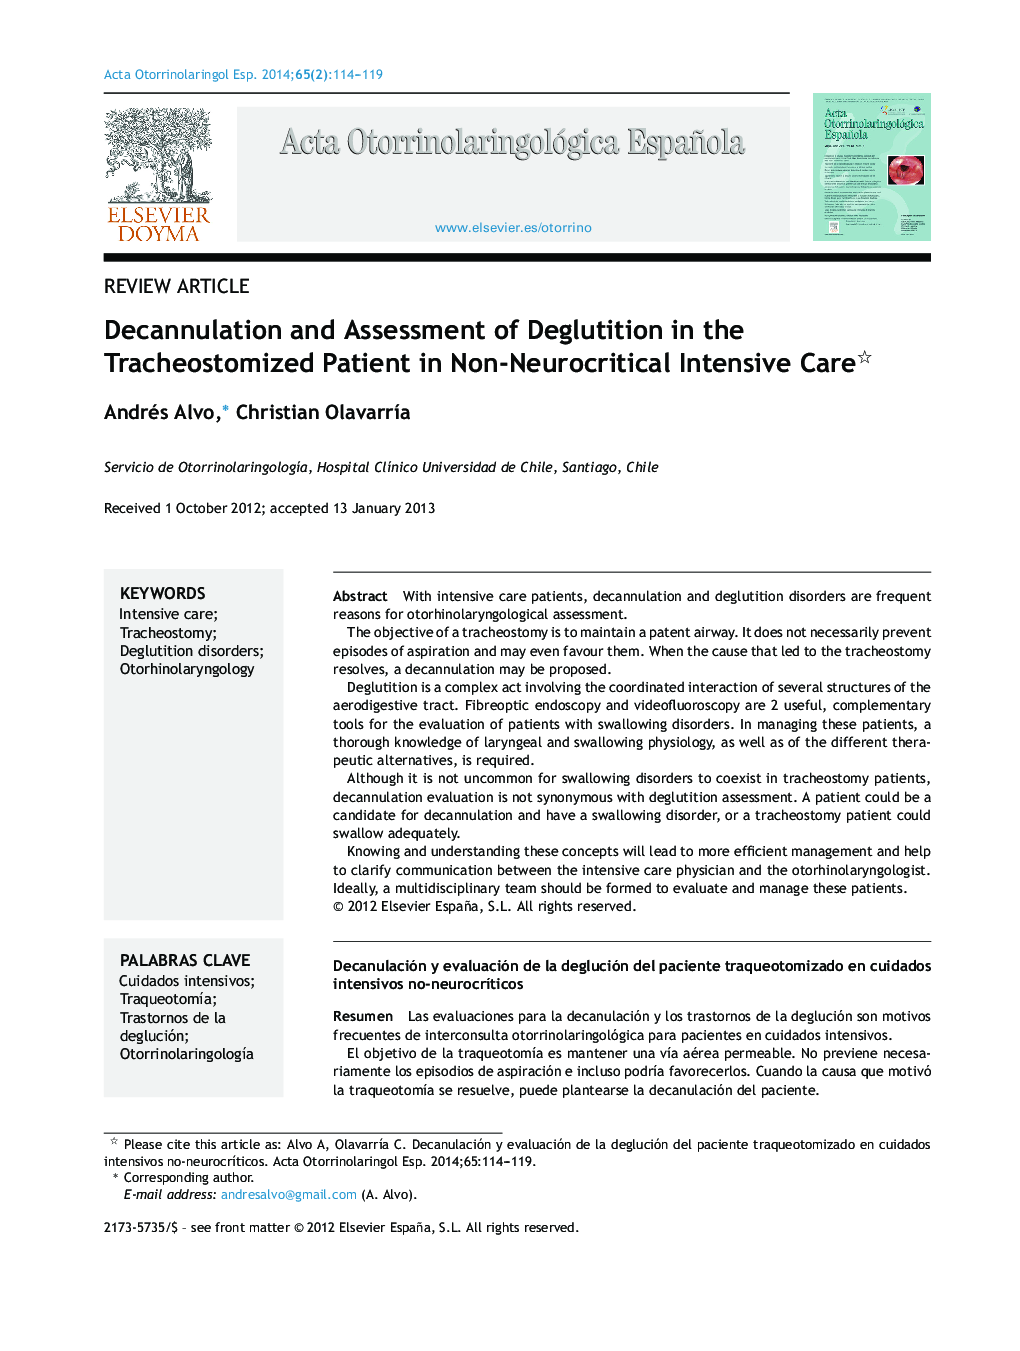 Decannulation and Assessment of Deglutition in the Tracheostomized Patient in Non-Neurocritical Intensive Care 